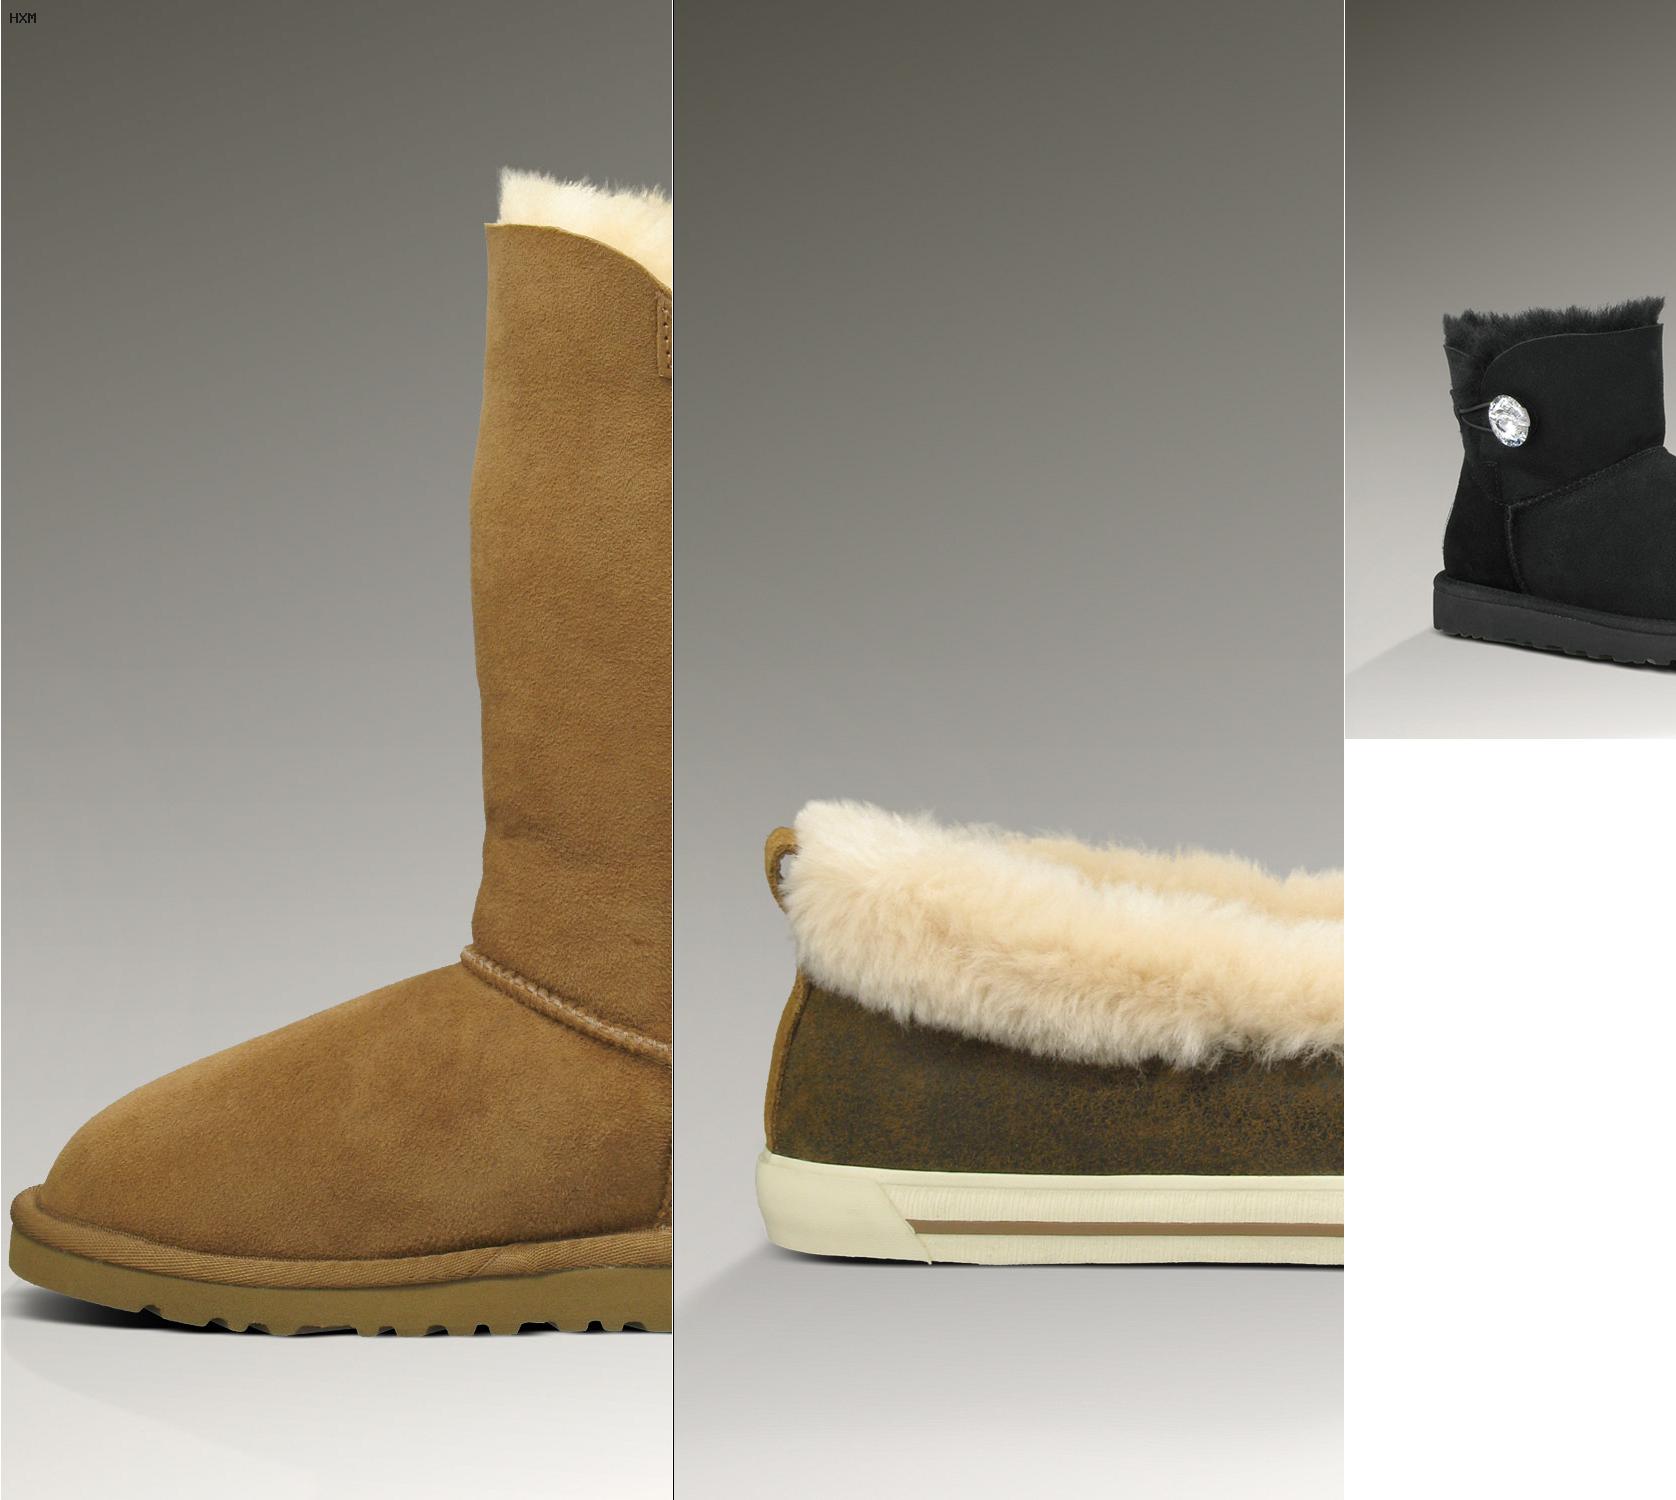 chaussures ugg femme pas cher